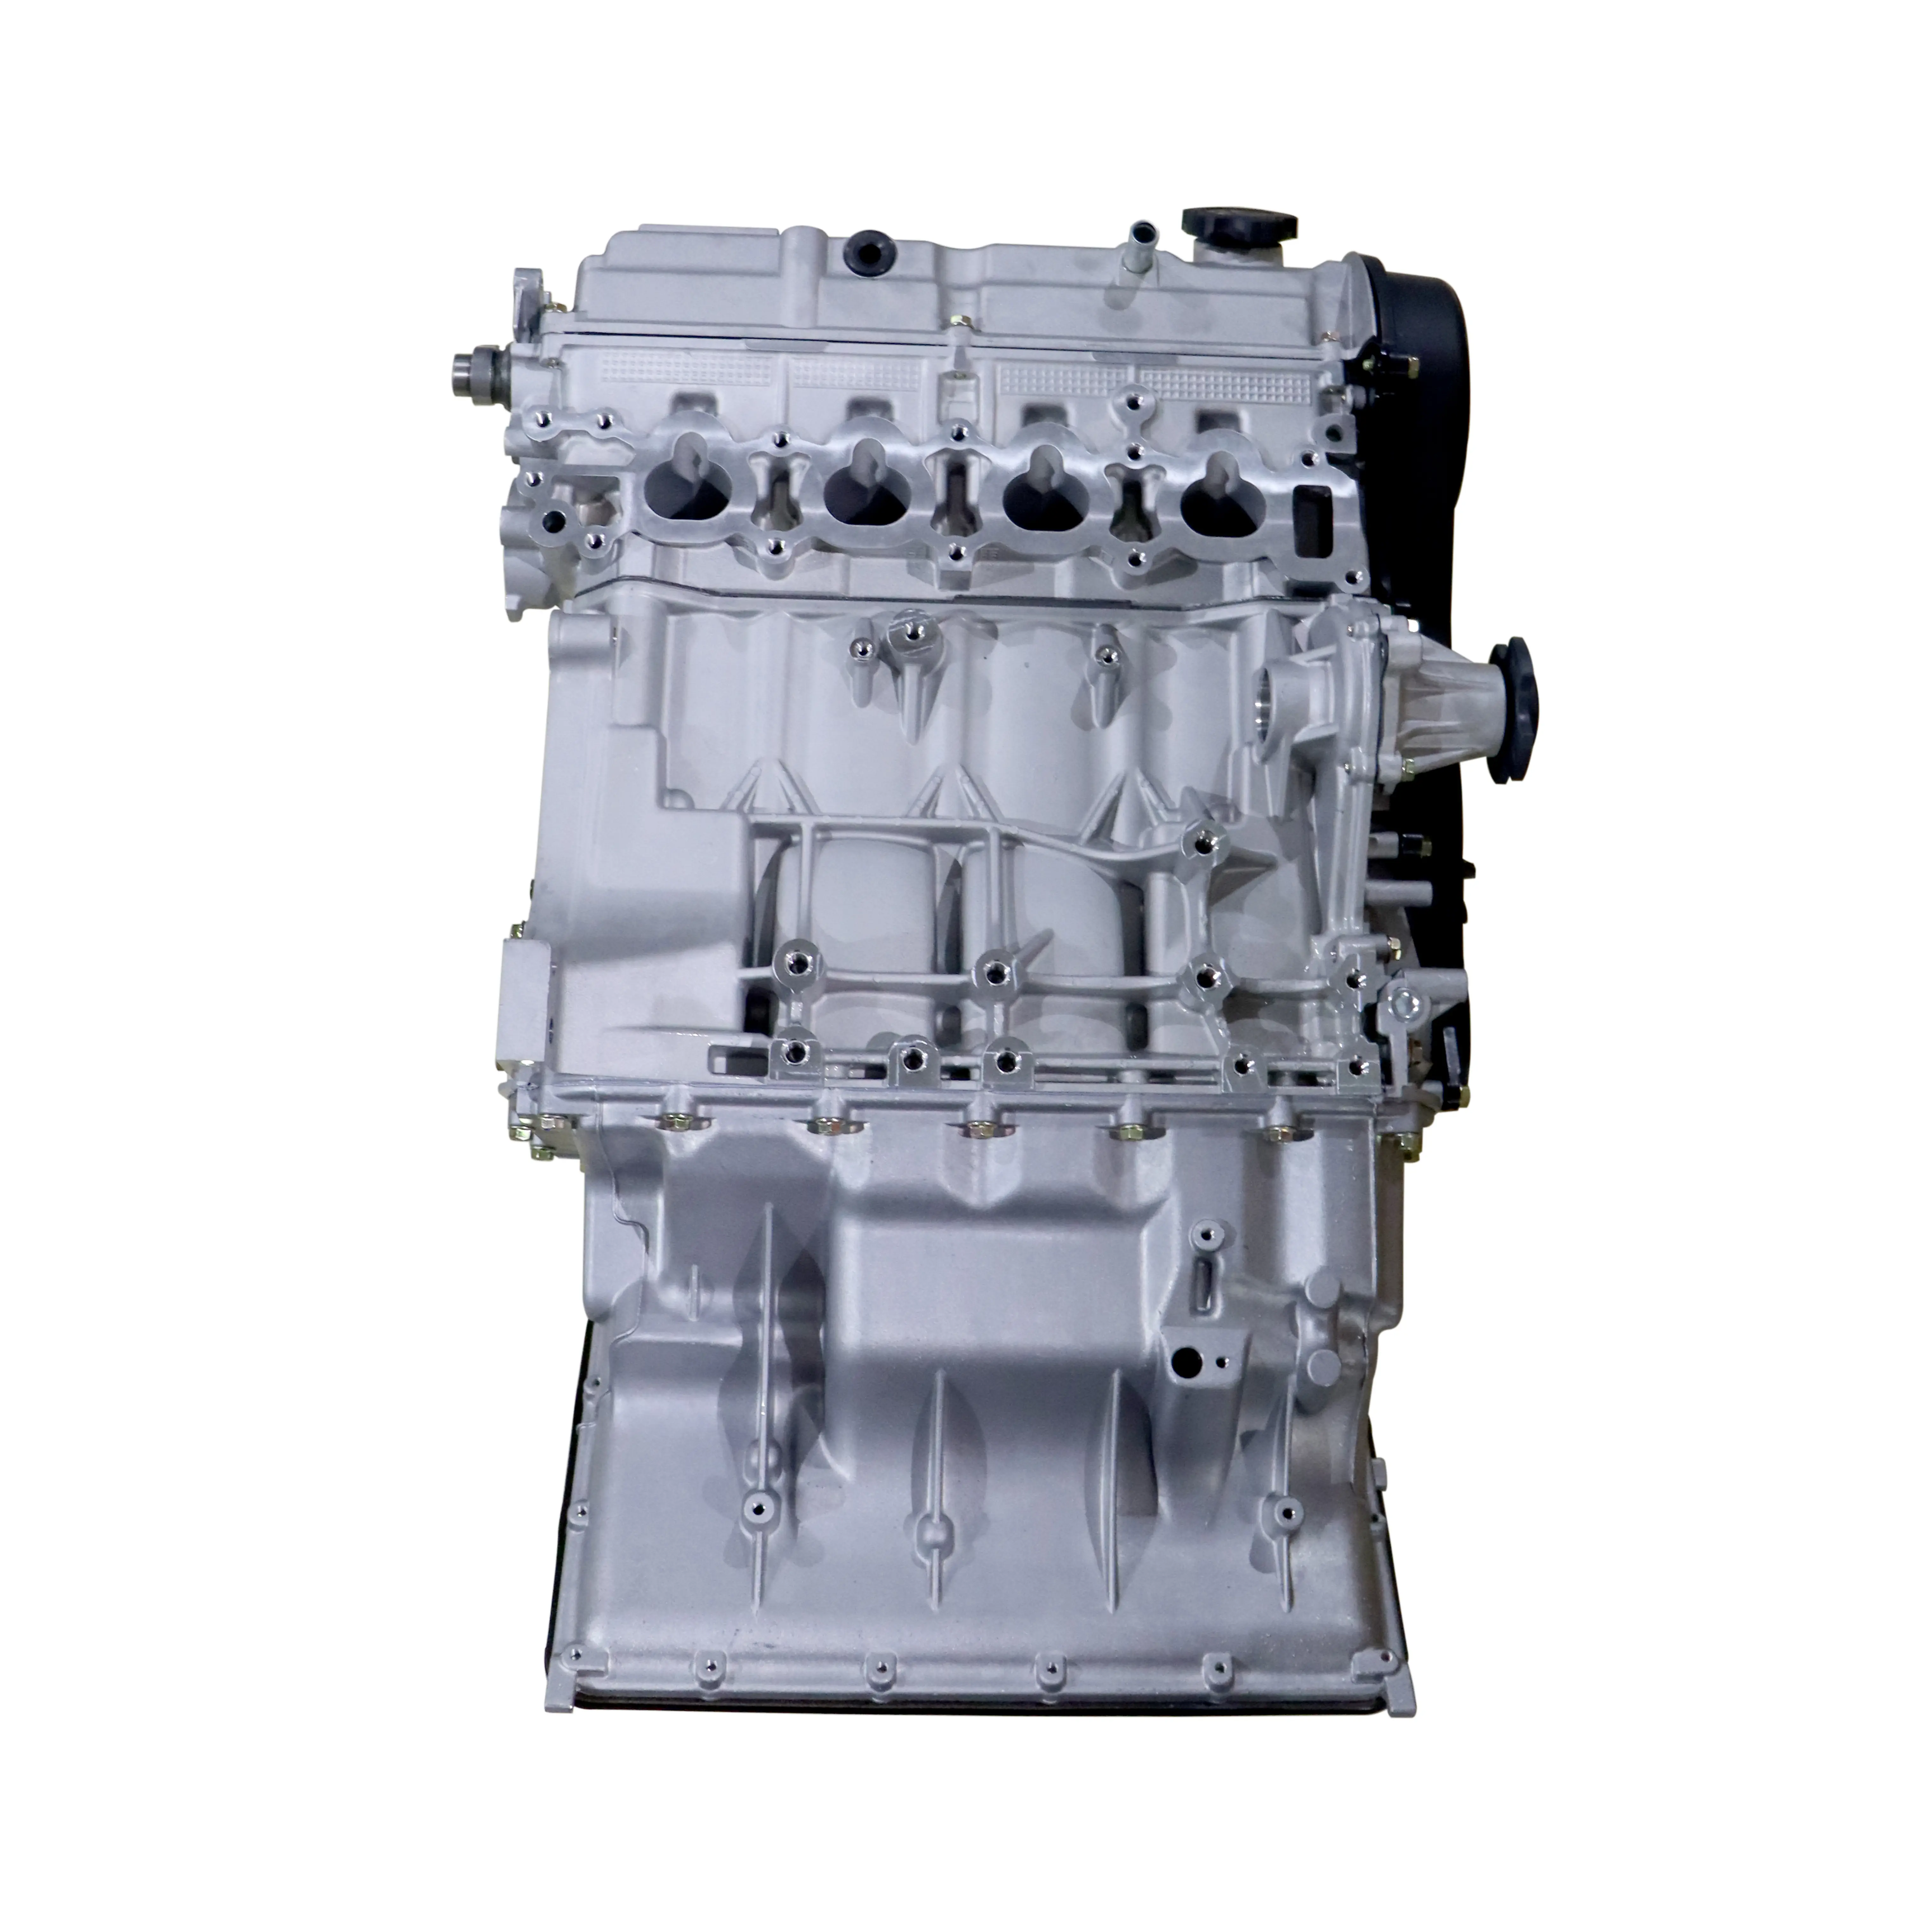 Factory LJ474QE2 Auto Engine Parts 4 Cylinder Head Cylinder Block Engine Assembly for Wuling Sunshine 474